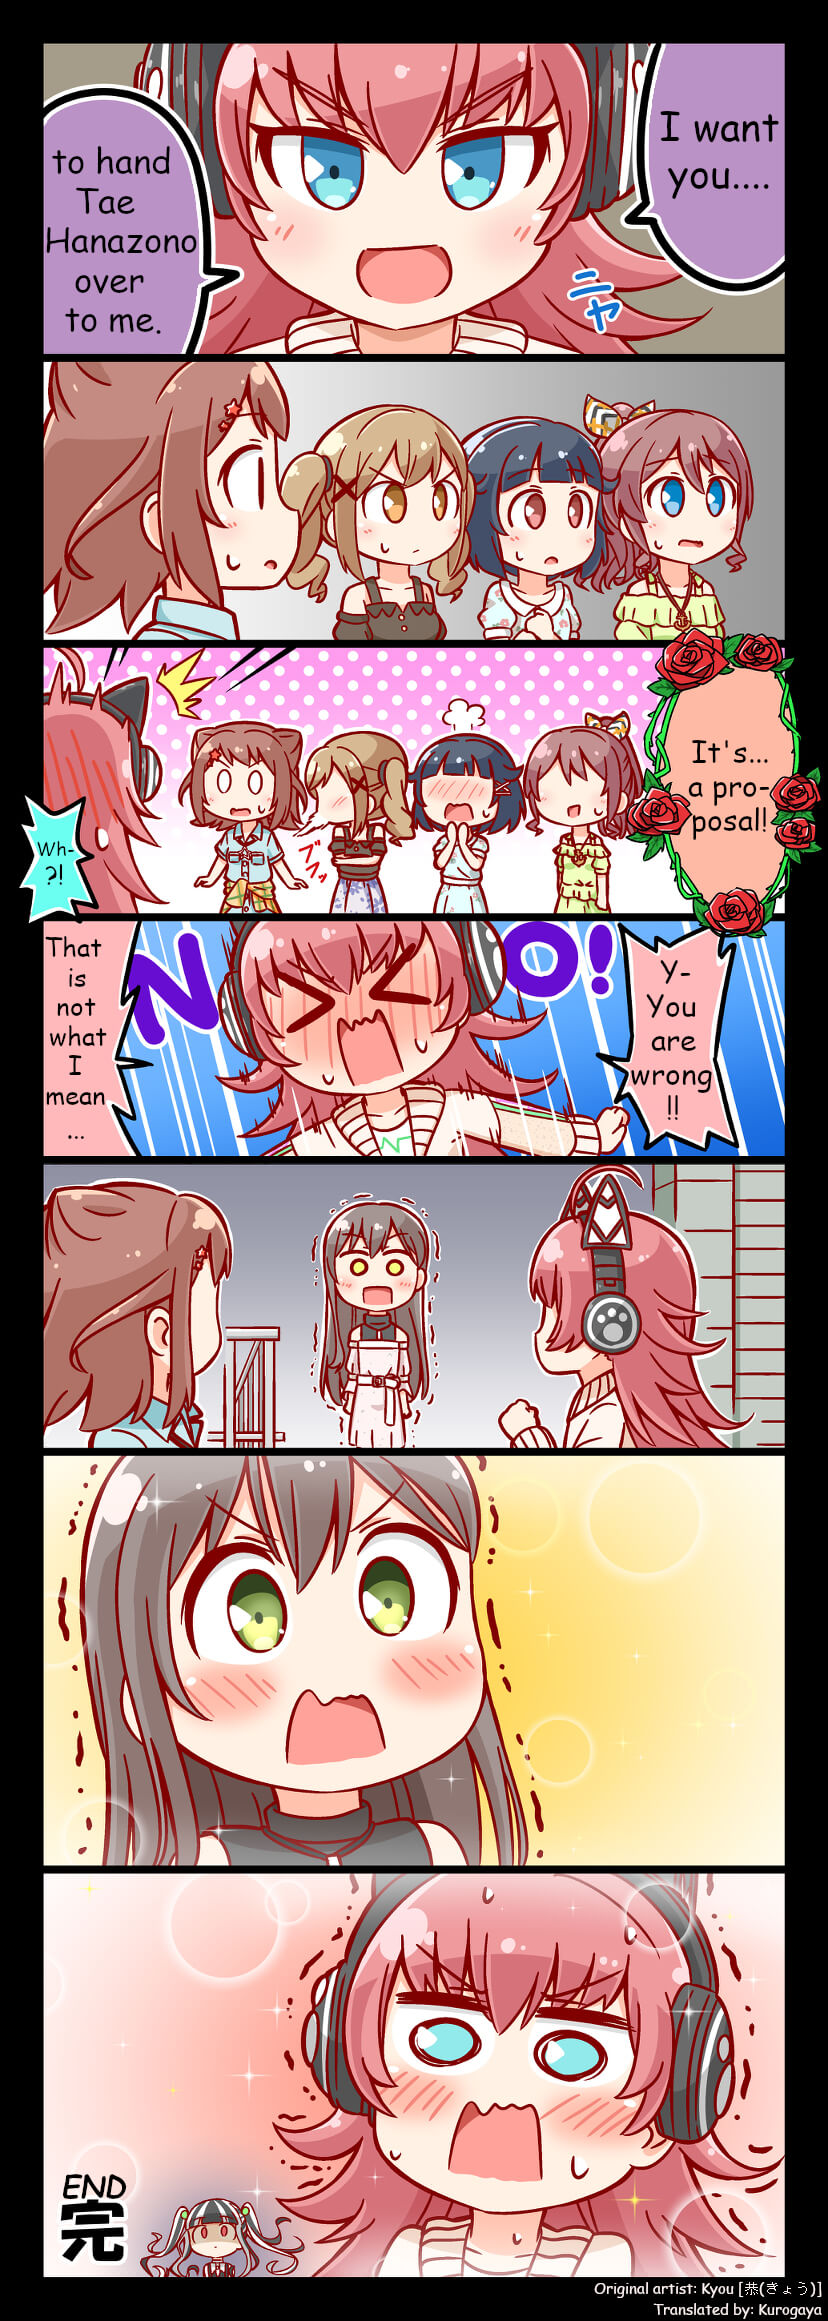 Hey guys!

I found this comic strip on the internet, and decided to translate it  since it was a...